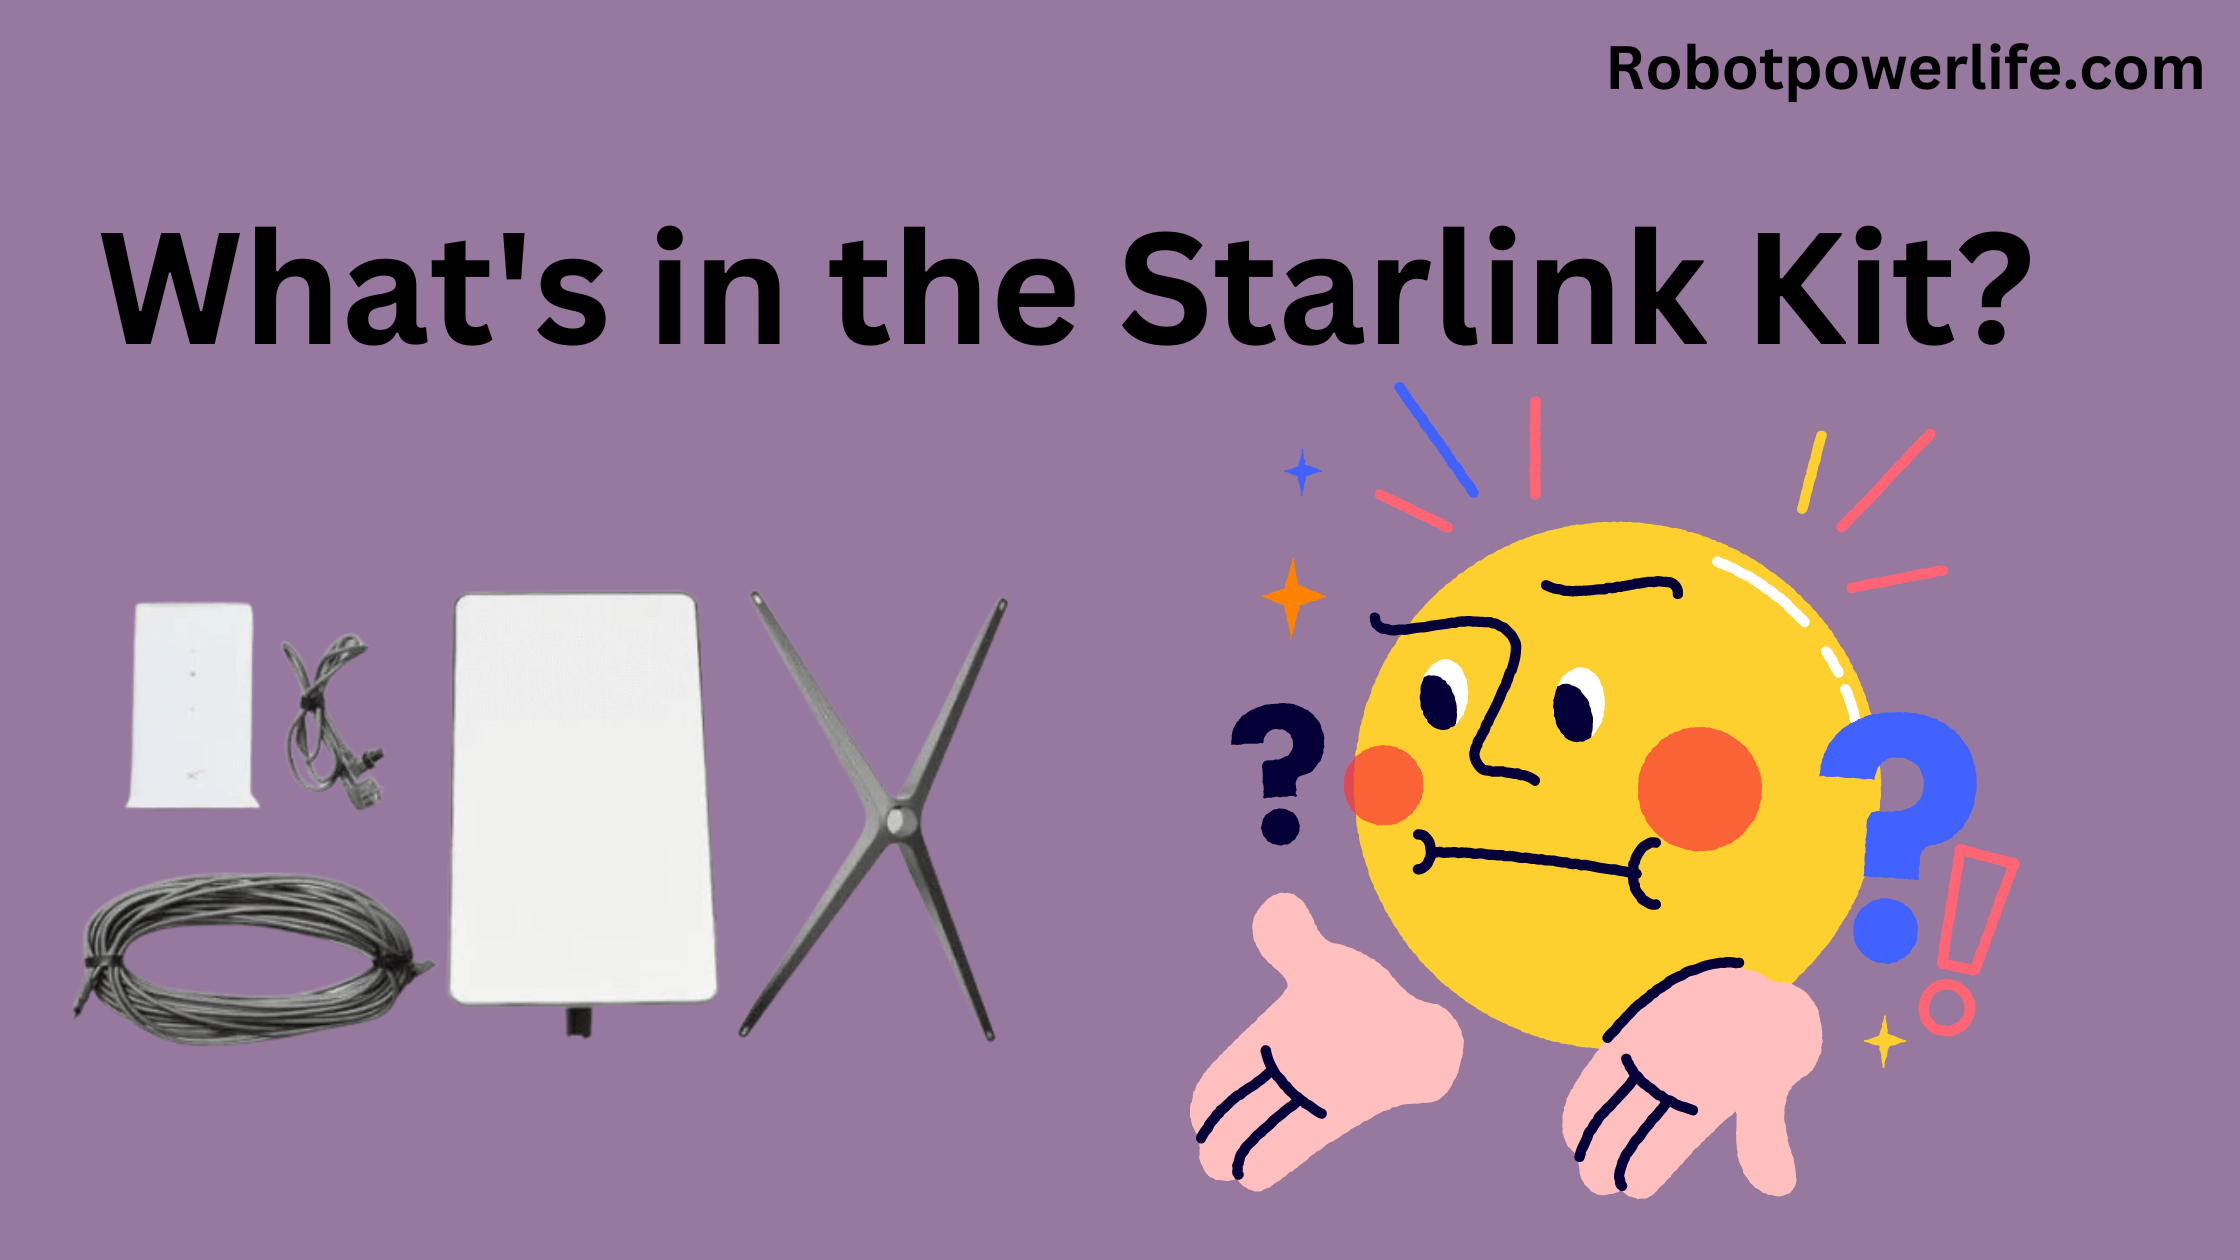 What's in the Starlink Kit?